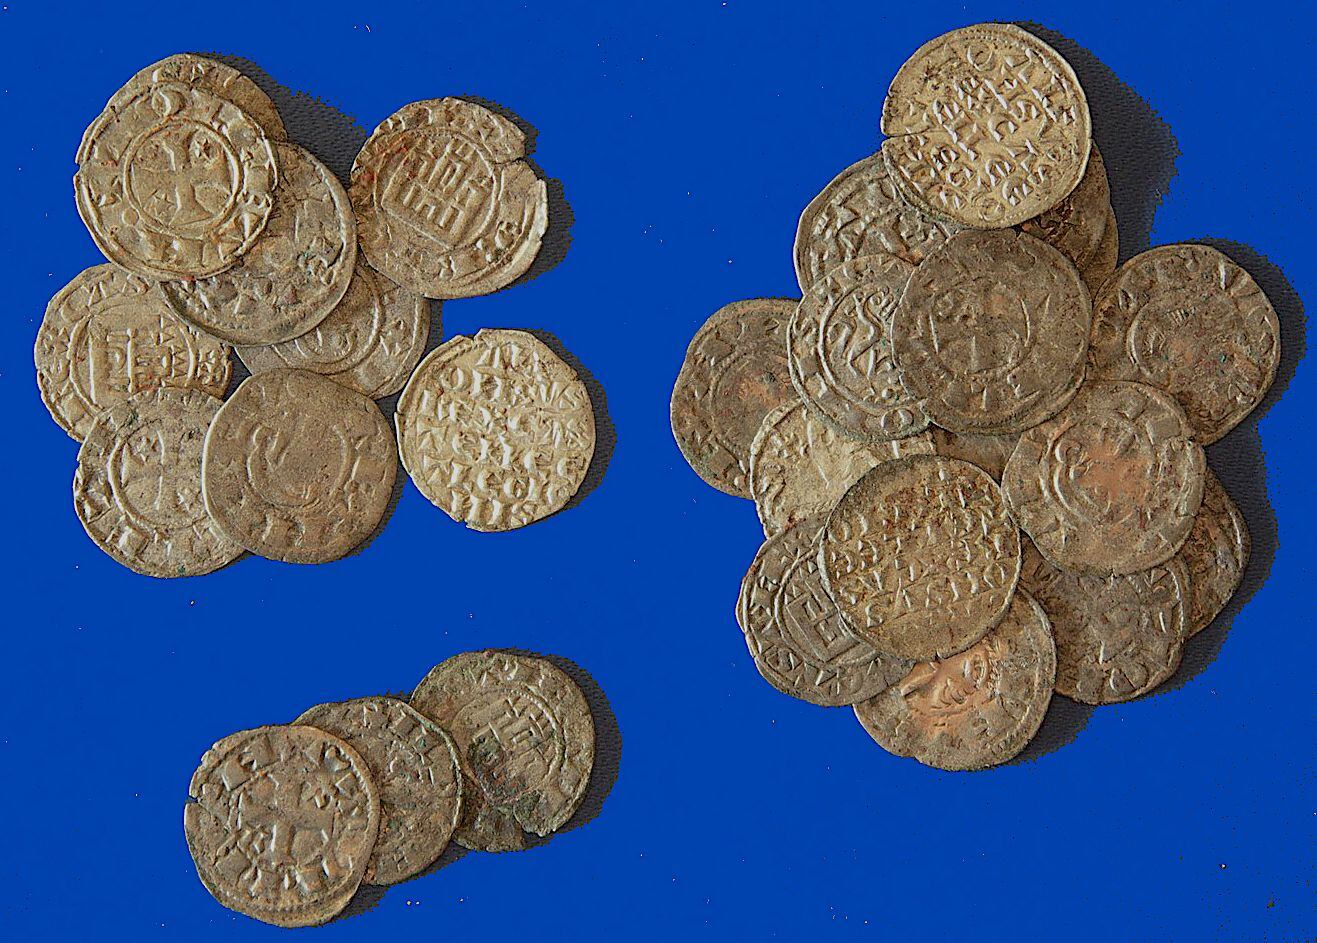 A hoard of 29 restored coins dating from the late 12th century to 1264.